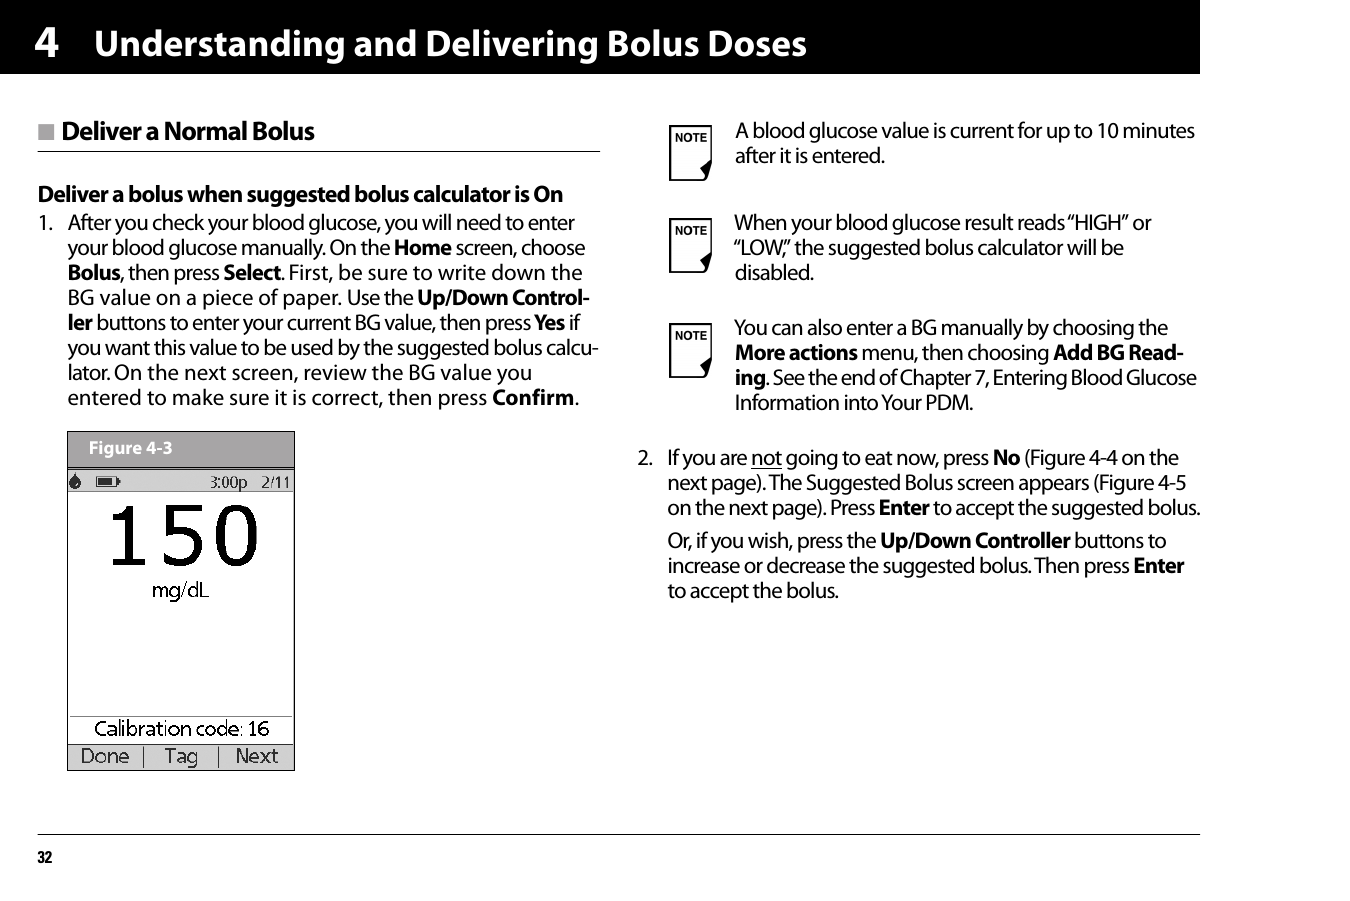 Understanding and Delivering Bolus Doses324n Deliver a Normal BolusDeliver a bolus when suggested bolus calculator is On1. After you check your blood glucose, you will need to enter your blood glucose manually. On the Home screen, choose Bolus, then press Select. First, be sure to write down the BG value on a piece of paper. Use the Up/Down Control-ler buttons to enter your current BG value, then press Yes  if you want this value to be used by the suggested bolus calcu-lator. On the next screen, review the BG value you entered to make sure it is correct, then press Confirm. 2. If you are not going to eat now, press No (Figure 4-4 on the next page). The Suggested Bolus screen appears (Figure 4-5 on the next page). Press Enter to accept the suggested bolus.Or, if you wish, press the Up/Down Controller buttons to increase or decrease the suggested bolus. Then press Enter to accept the bolus.Figure 4-3A blood glucose value is current for up to 10 minutes after it is entered. When your blood glucose result reads “HIGH” or “LOW,” the suggested bolus calculator will be disabled.You can also enter a BG manually by choosing the More actions menu, then choosing Add BG Read-ing. See the end of Chapter 7, Entering Blood Glucose Information into Your PDM.